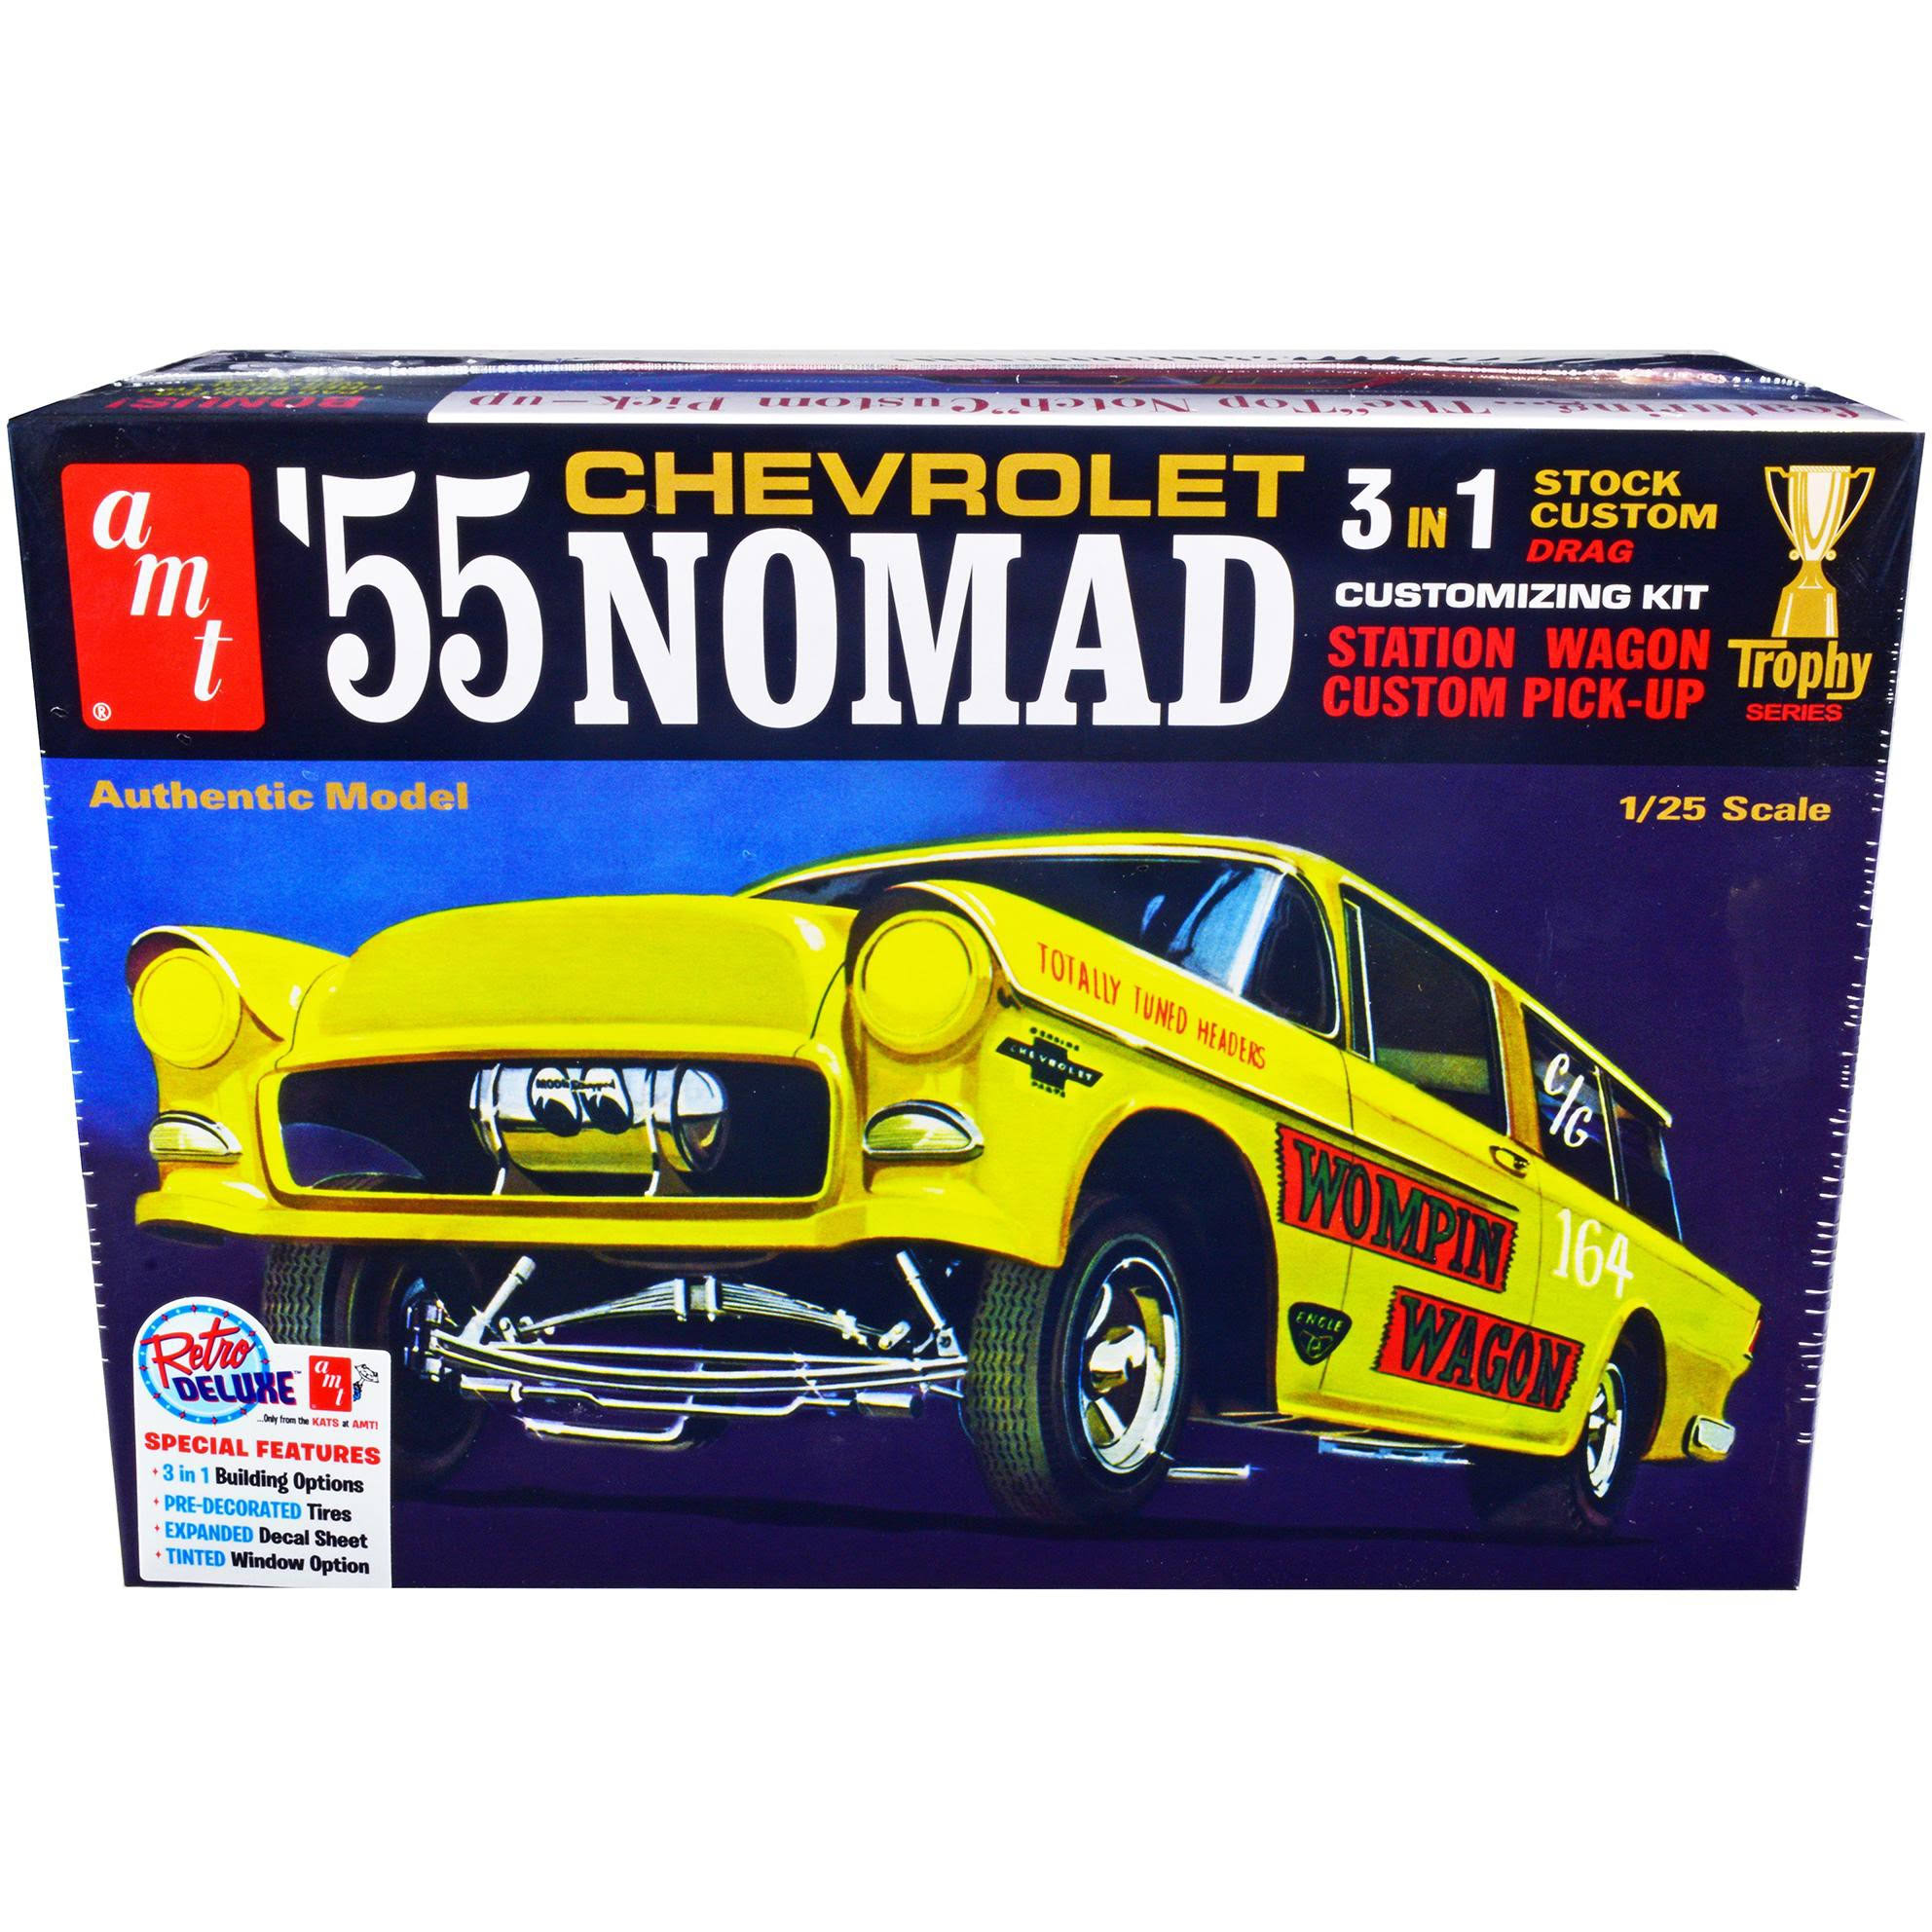 AMT 1/25 1955 Chevy Nomad Station Wagon Customizing Car Kit (3 in 1) AMT1297